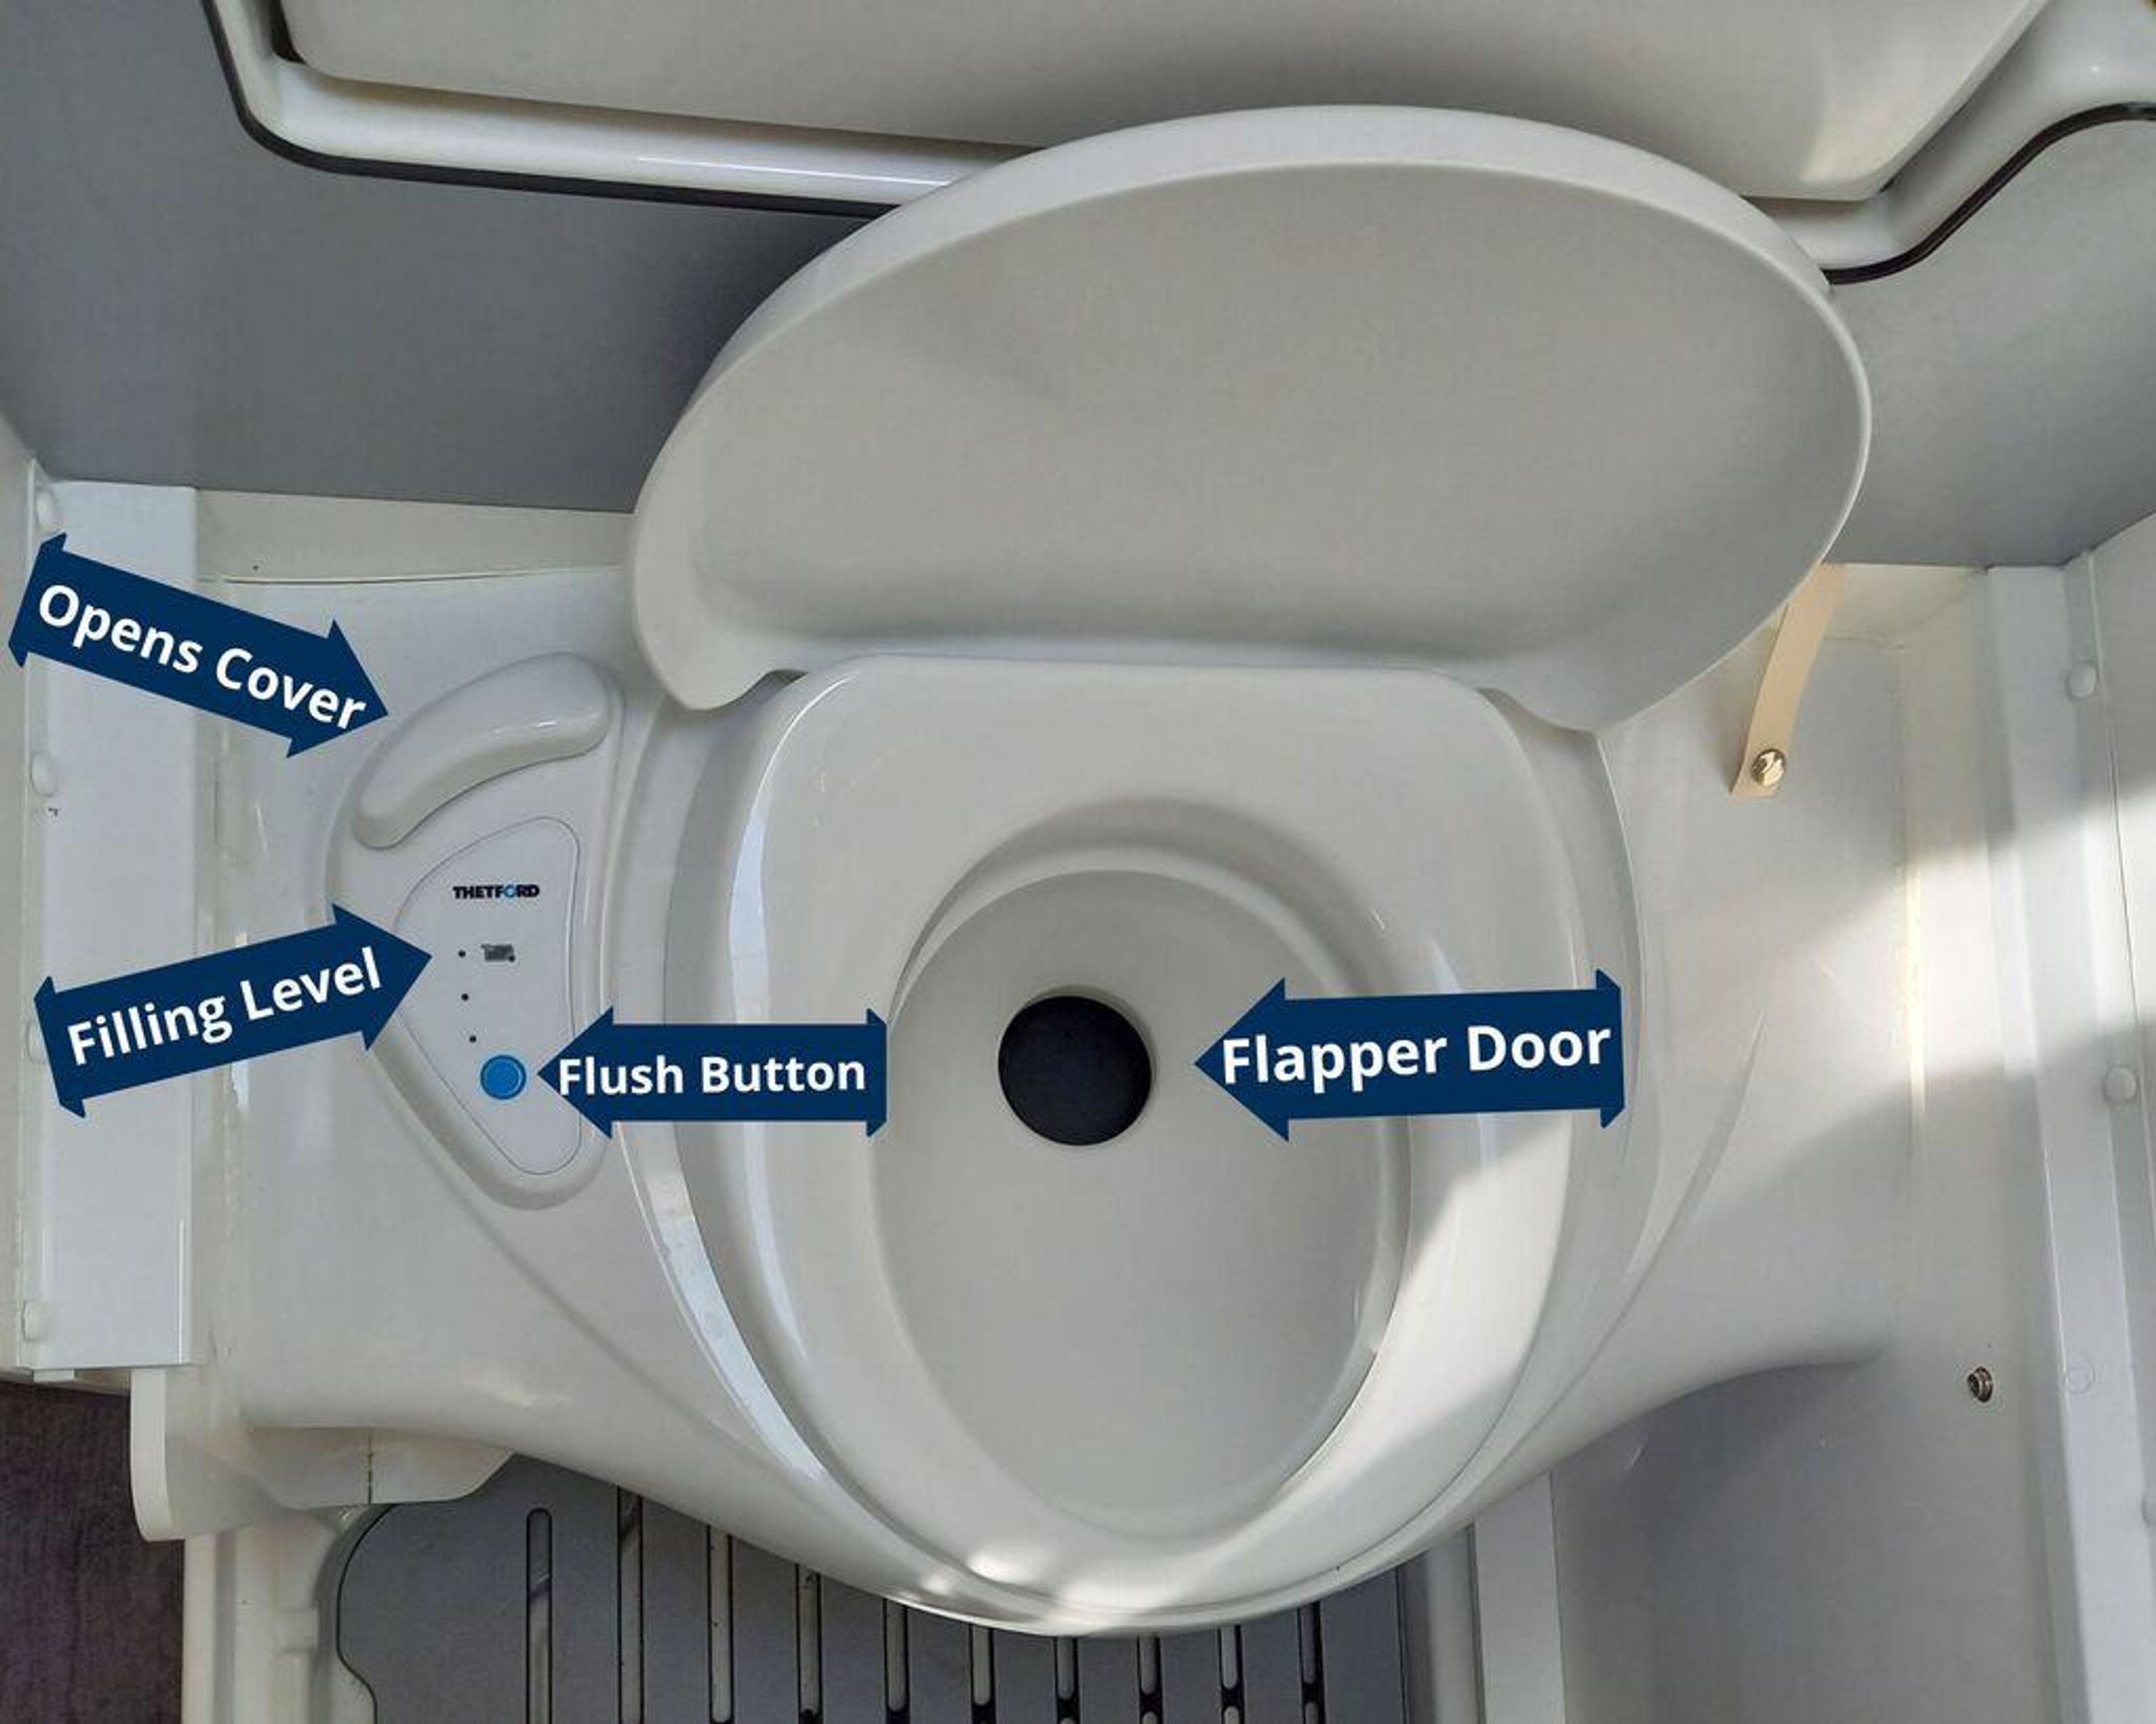 Know when to empty the campervan toilet